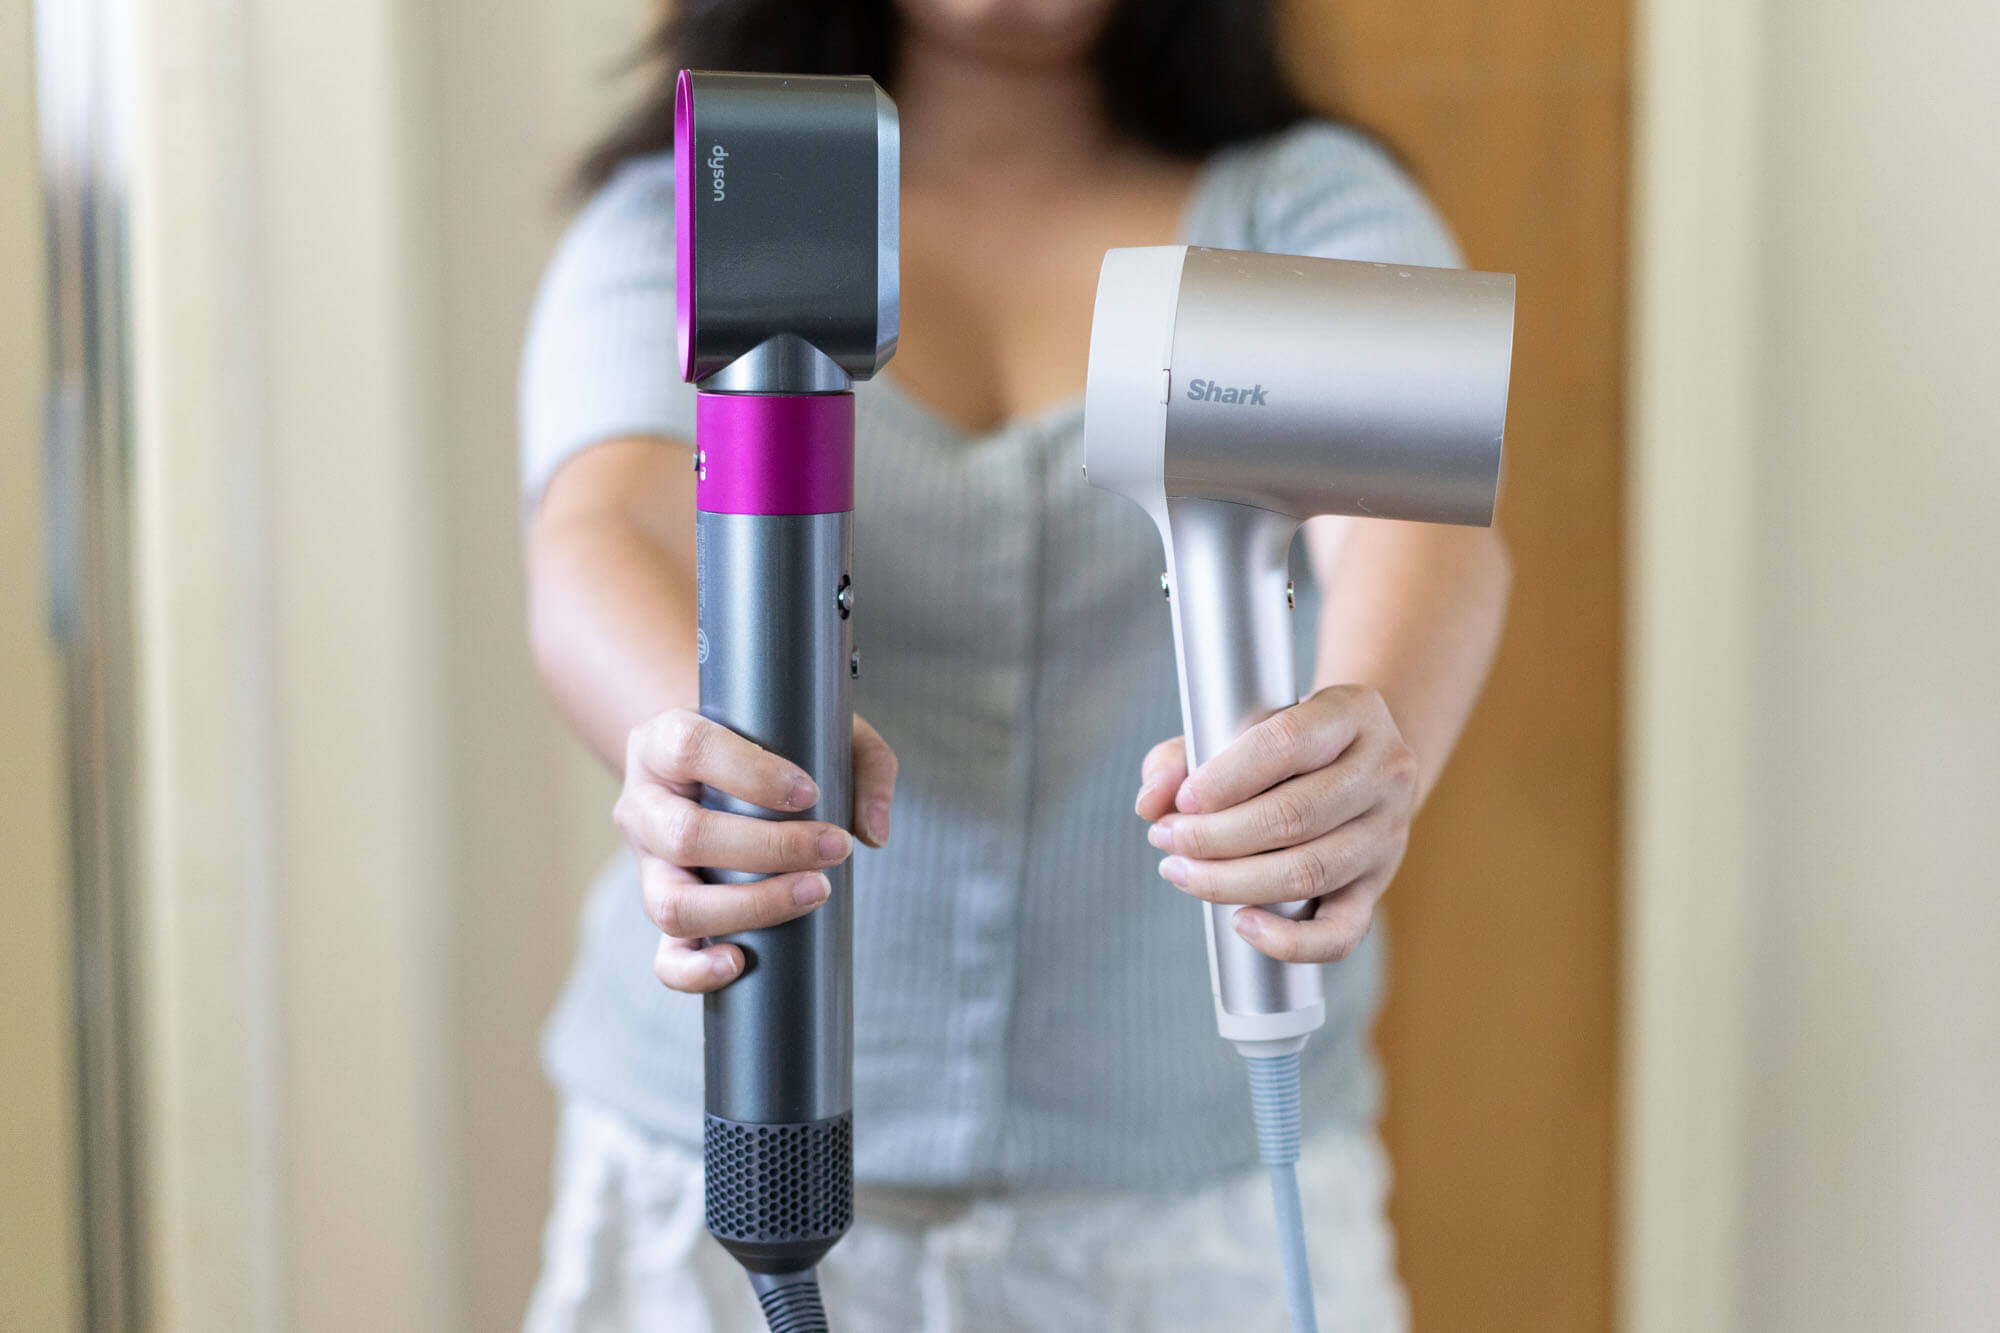 Shark Style iQ hair dryer review